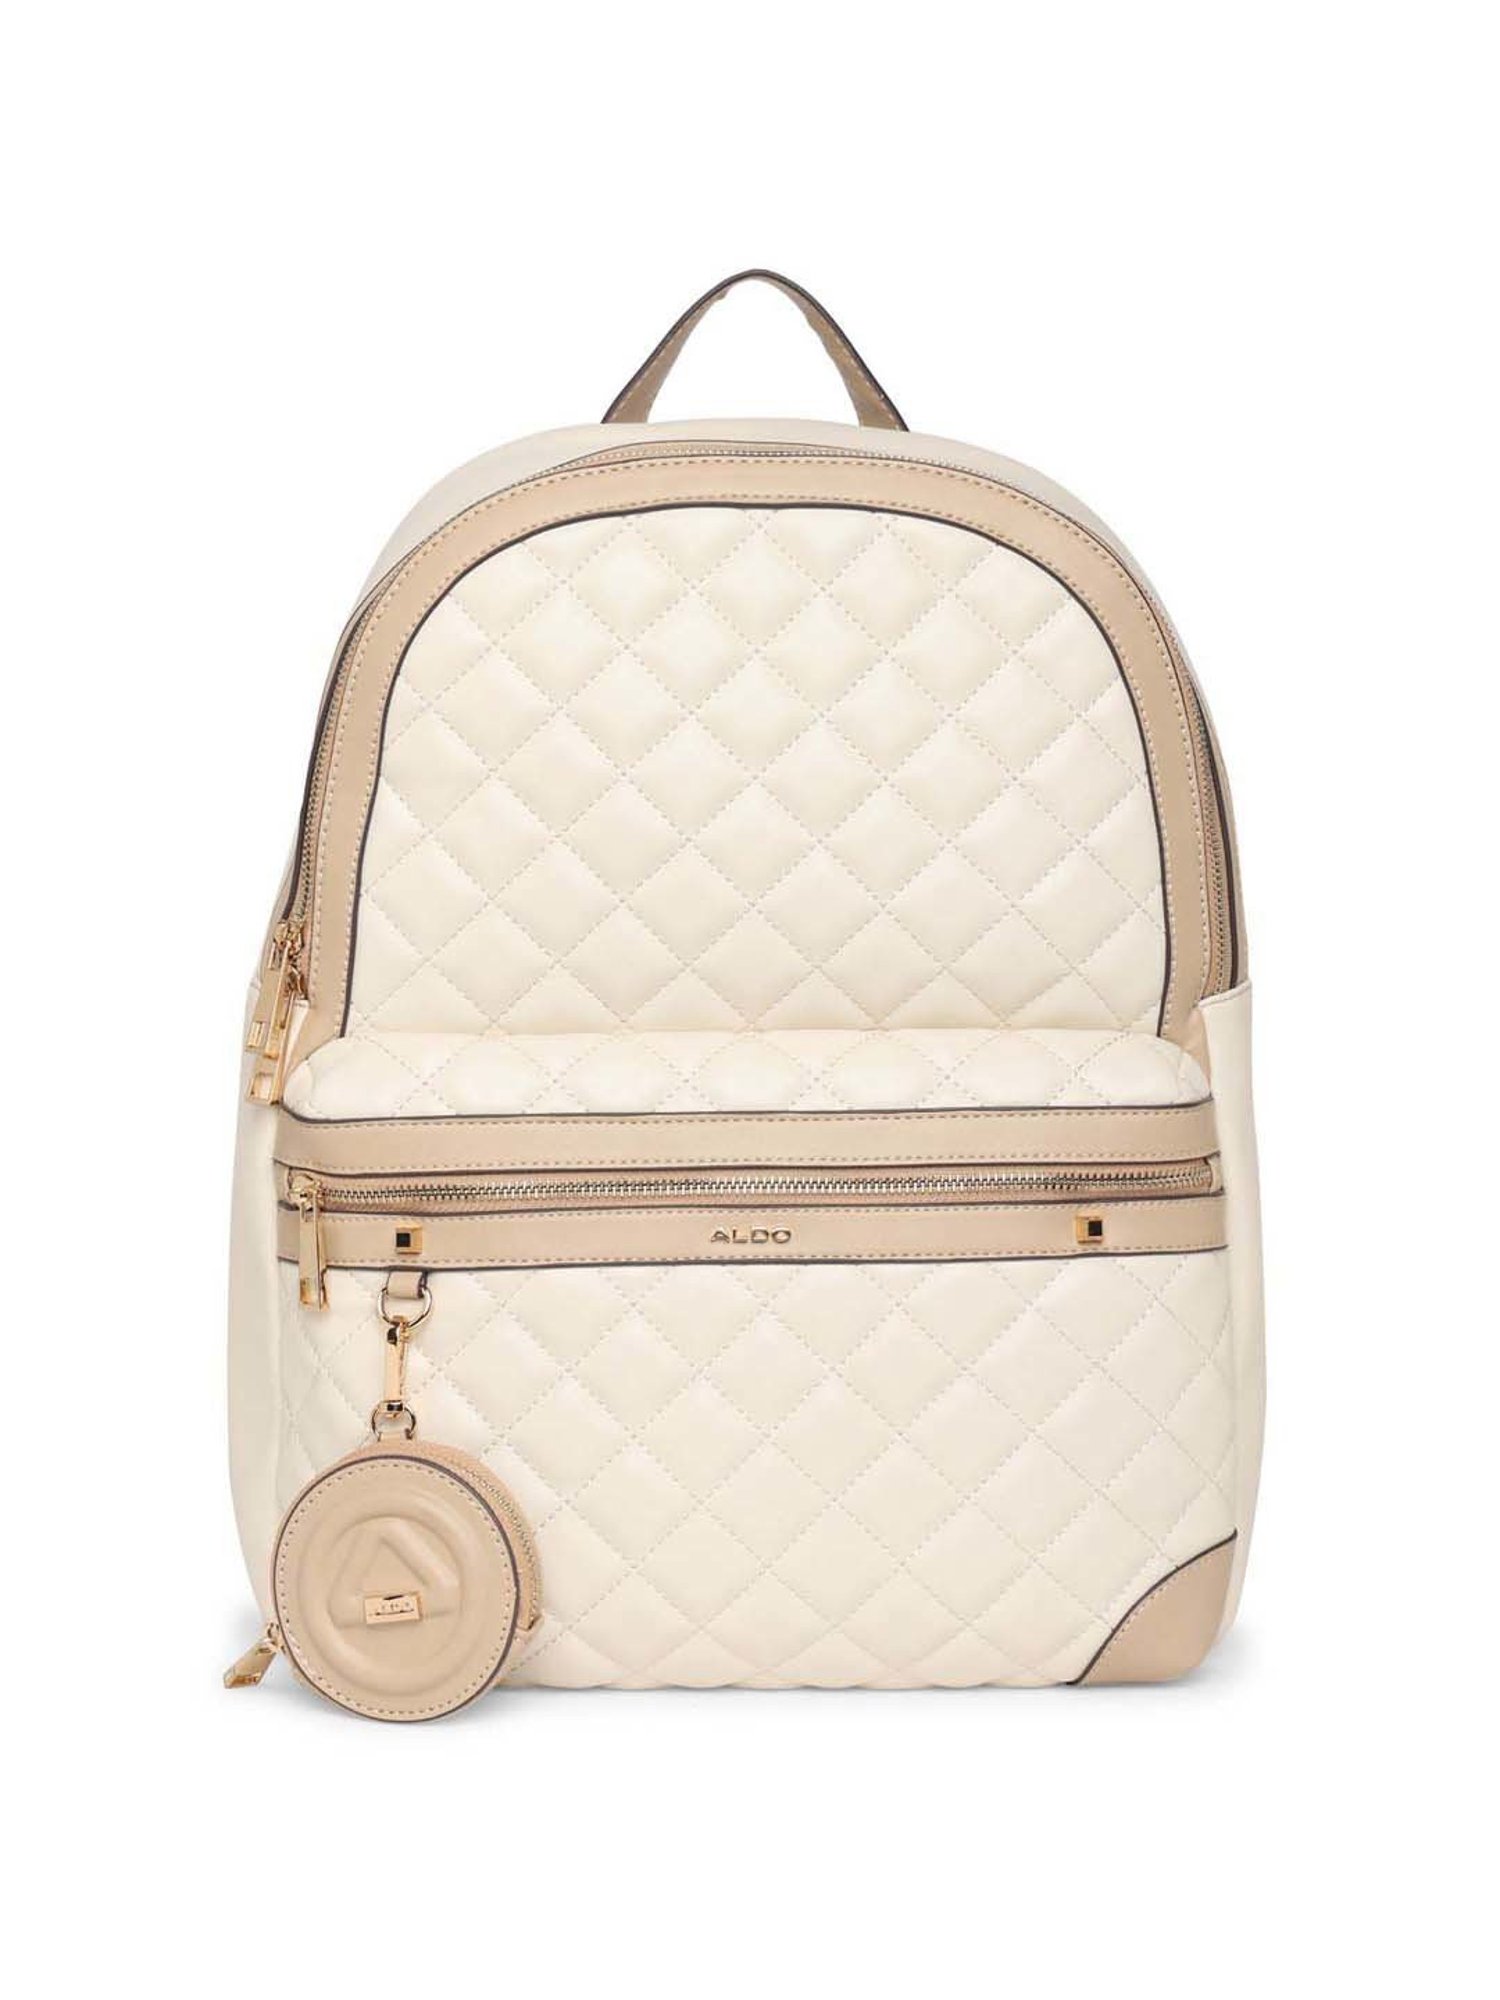 Small Beige Backpack - Buy Small Beige Backpack online in India